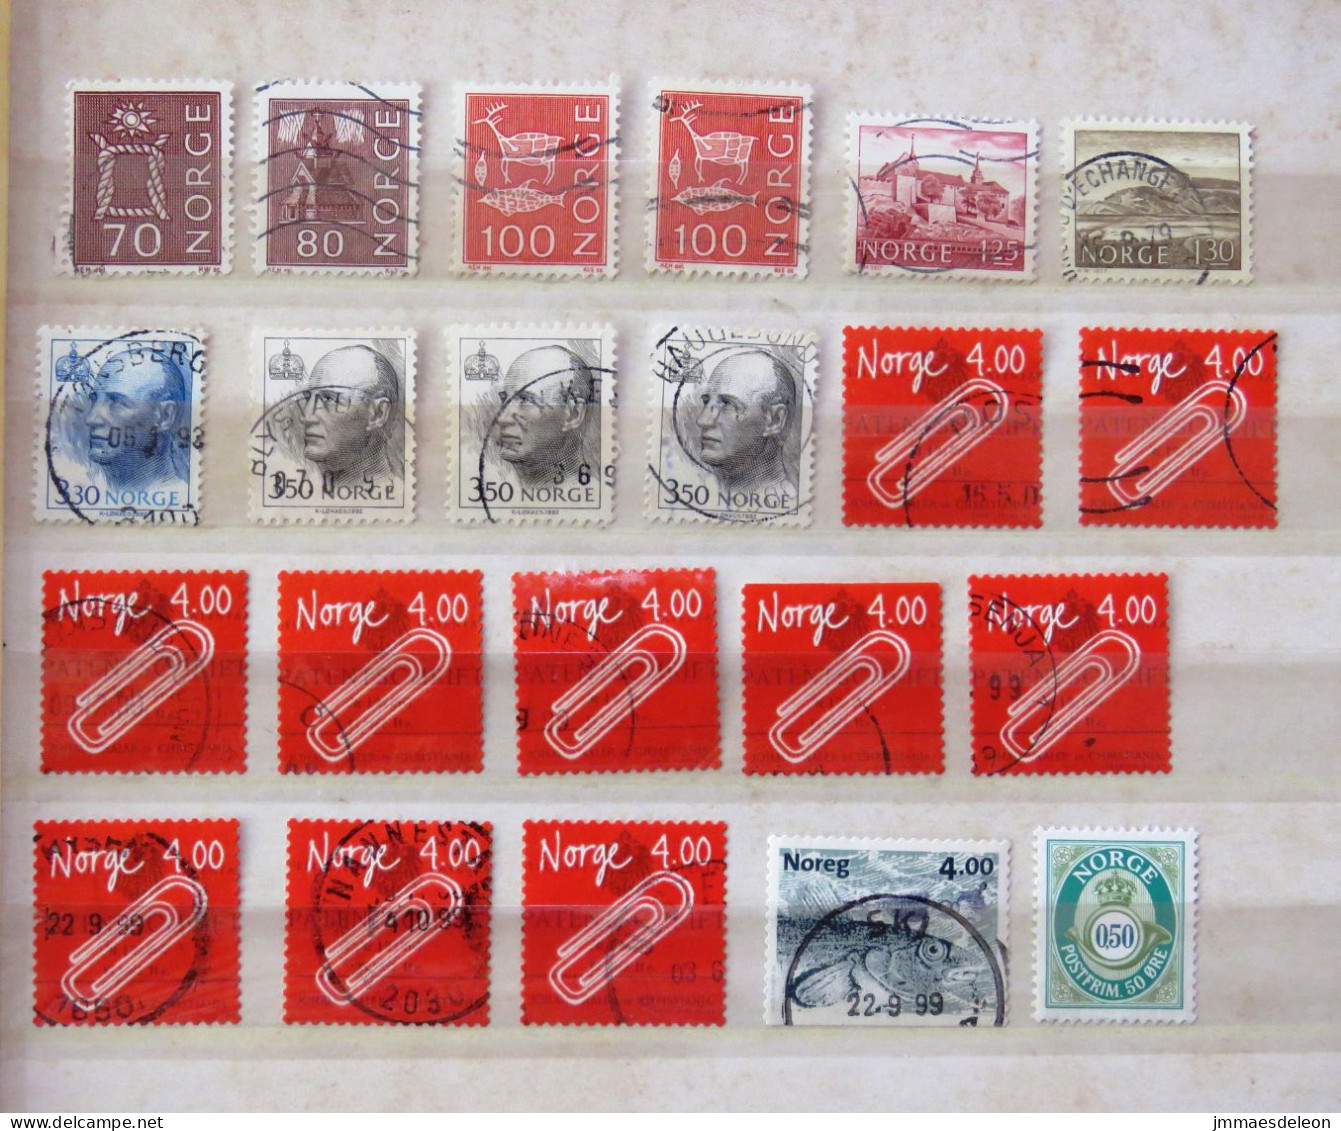 Norway 1964 - 2001 King Churches Animals Clip Fish Horn - Used Stamps